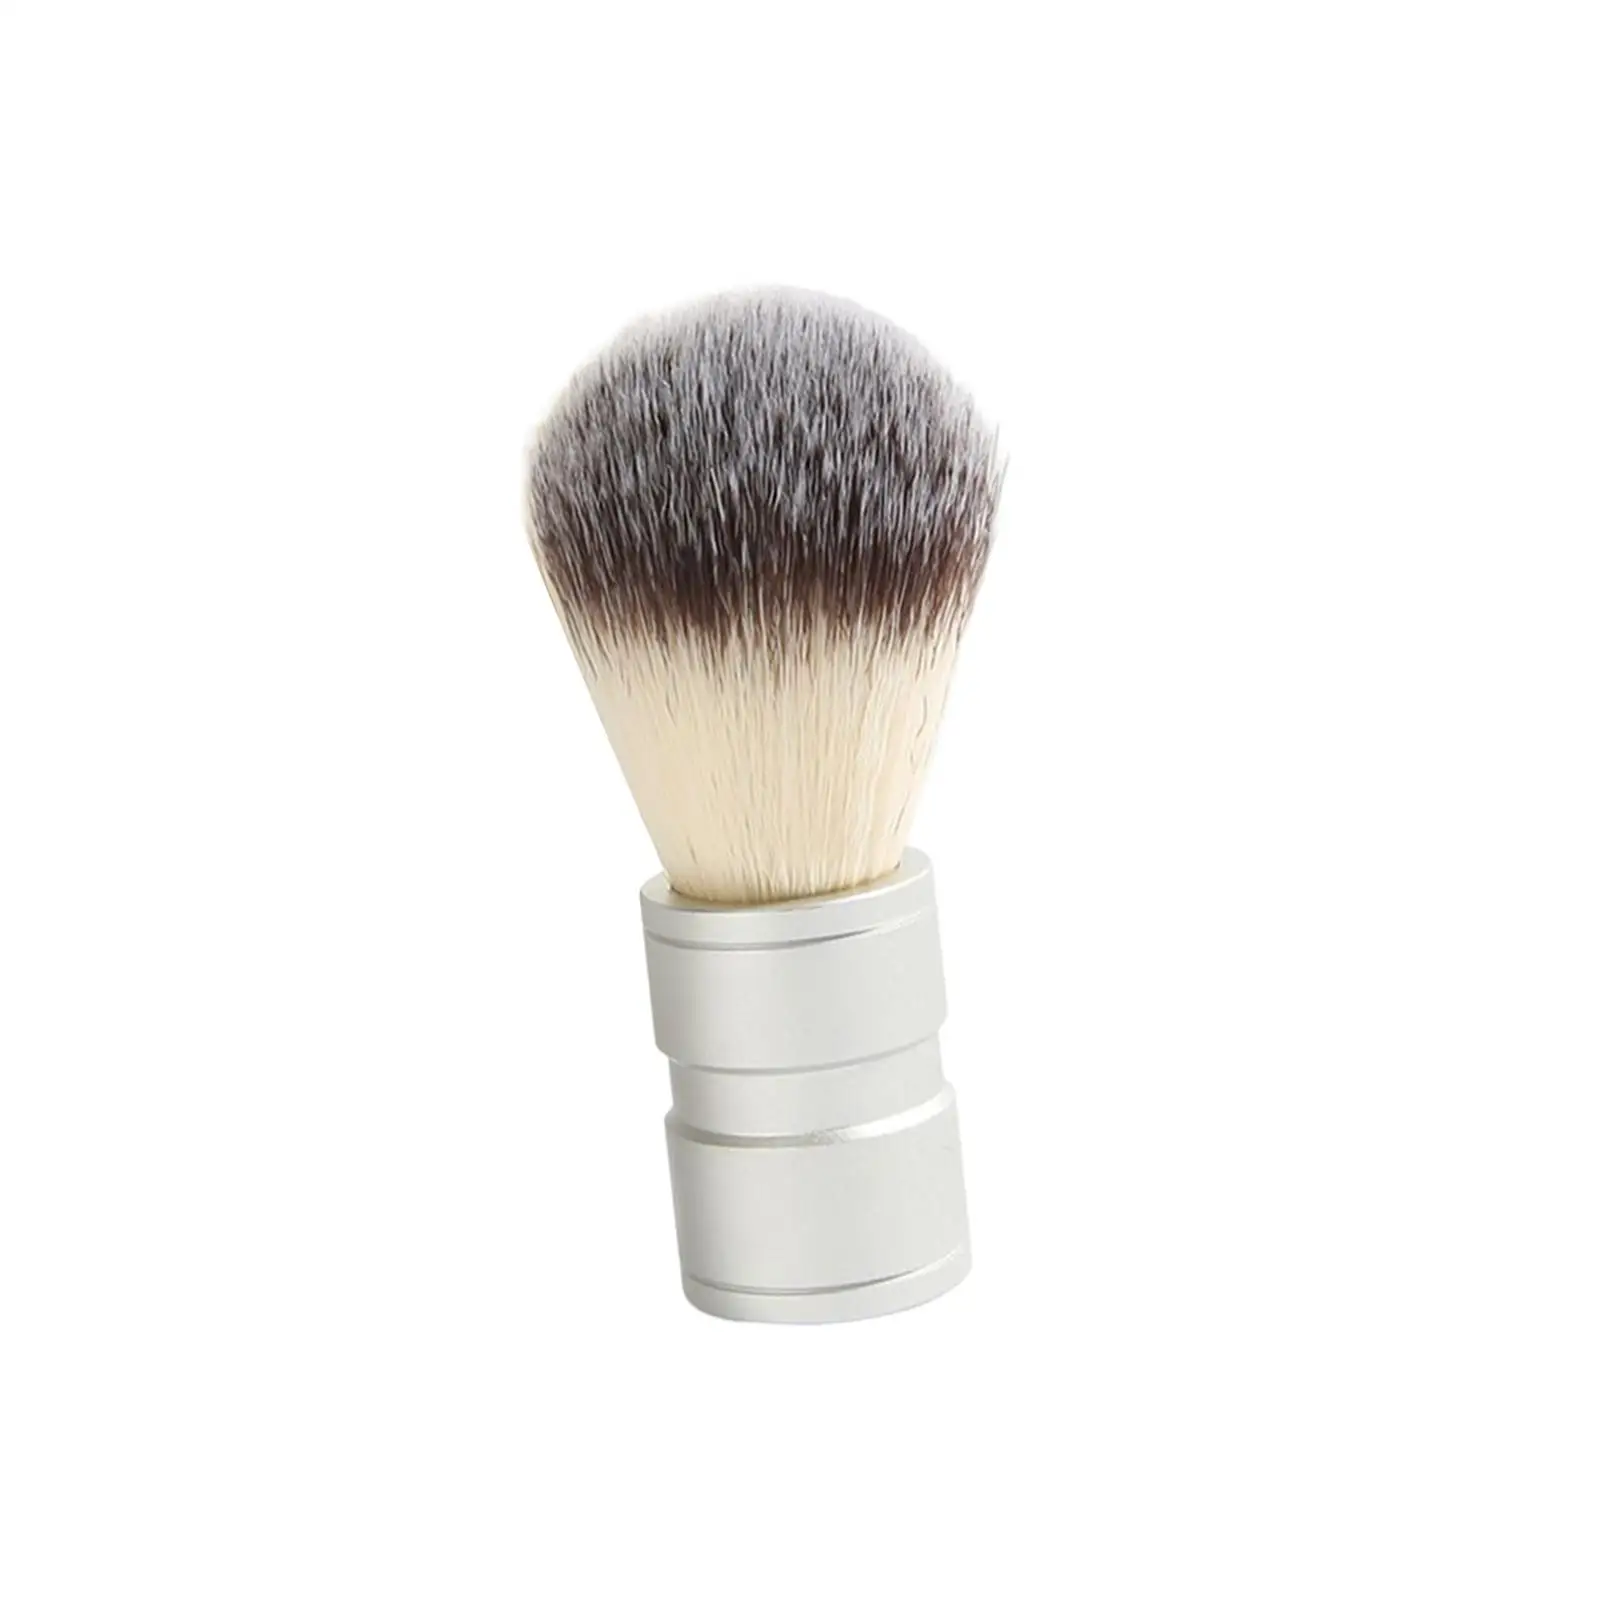 Hair Shaving Brush Lightweight Male Grooming Facial Head Hair Clean Face Cleaning for Barber Husband Barbershop Festival Gifts